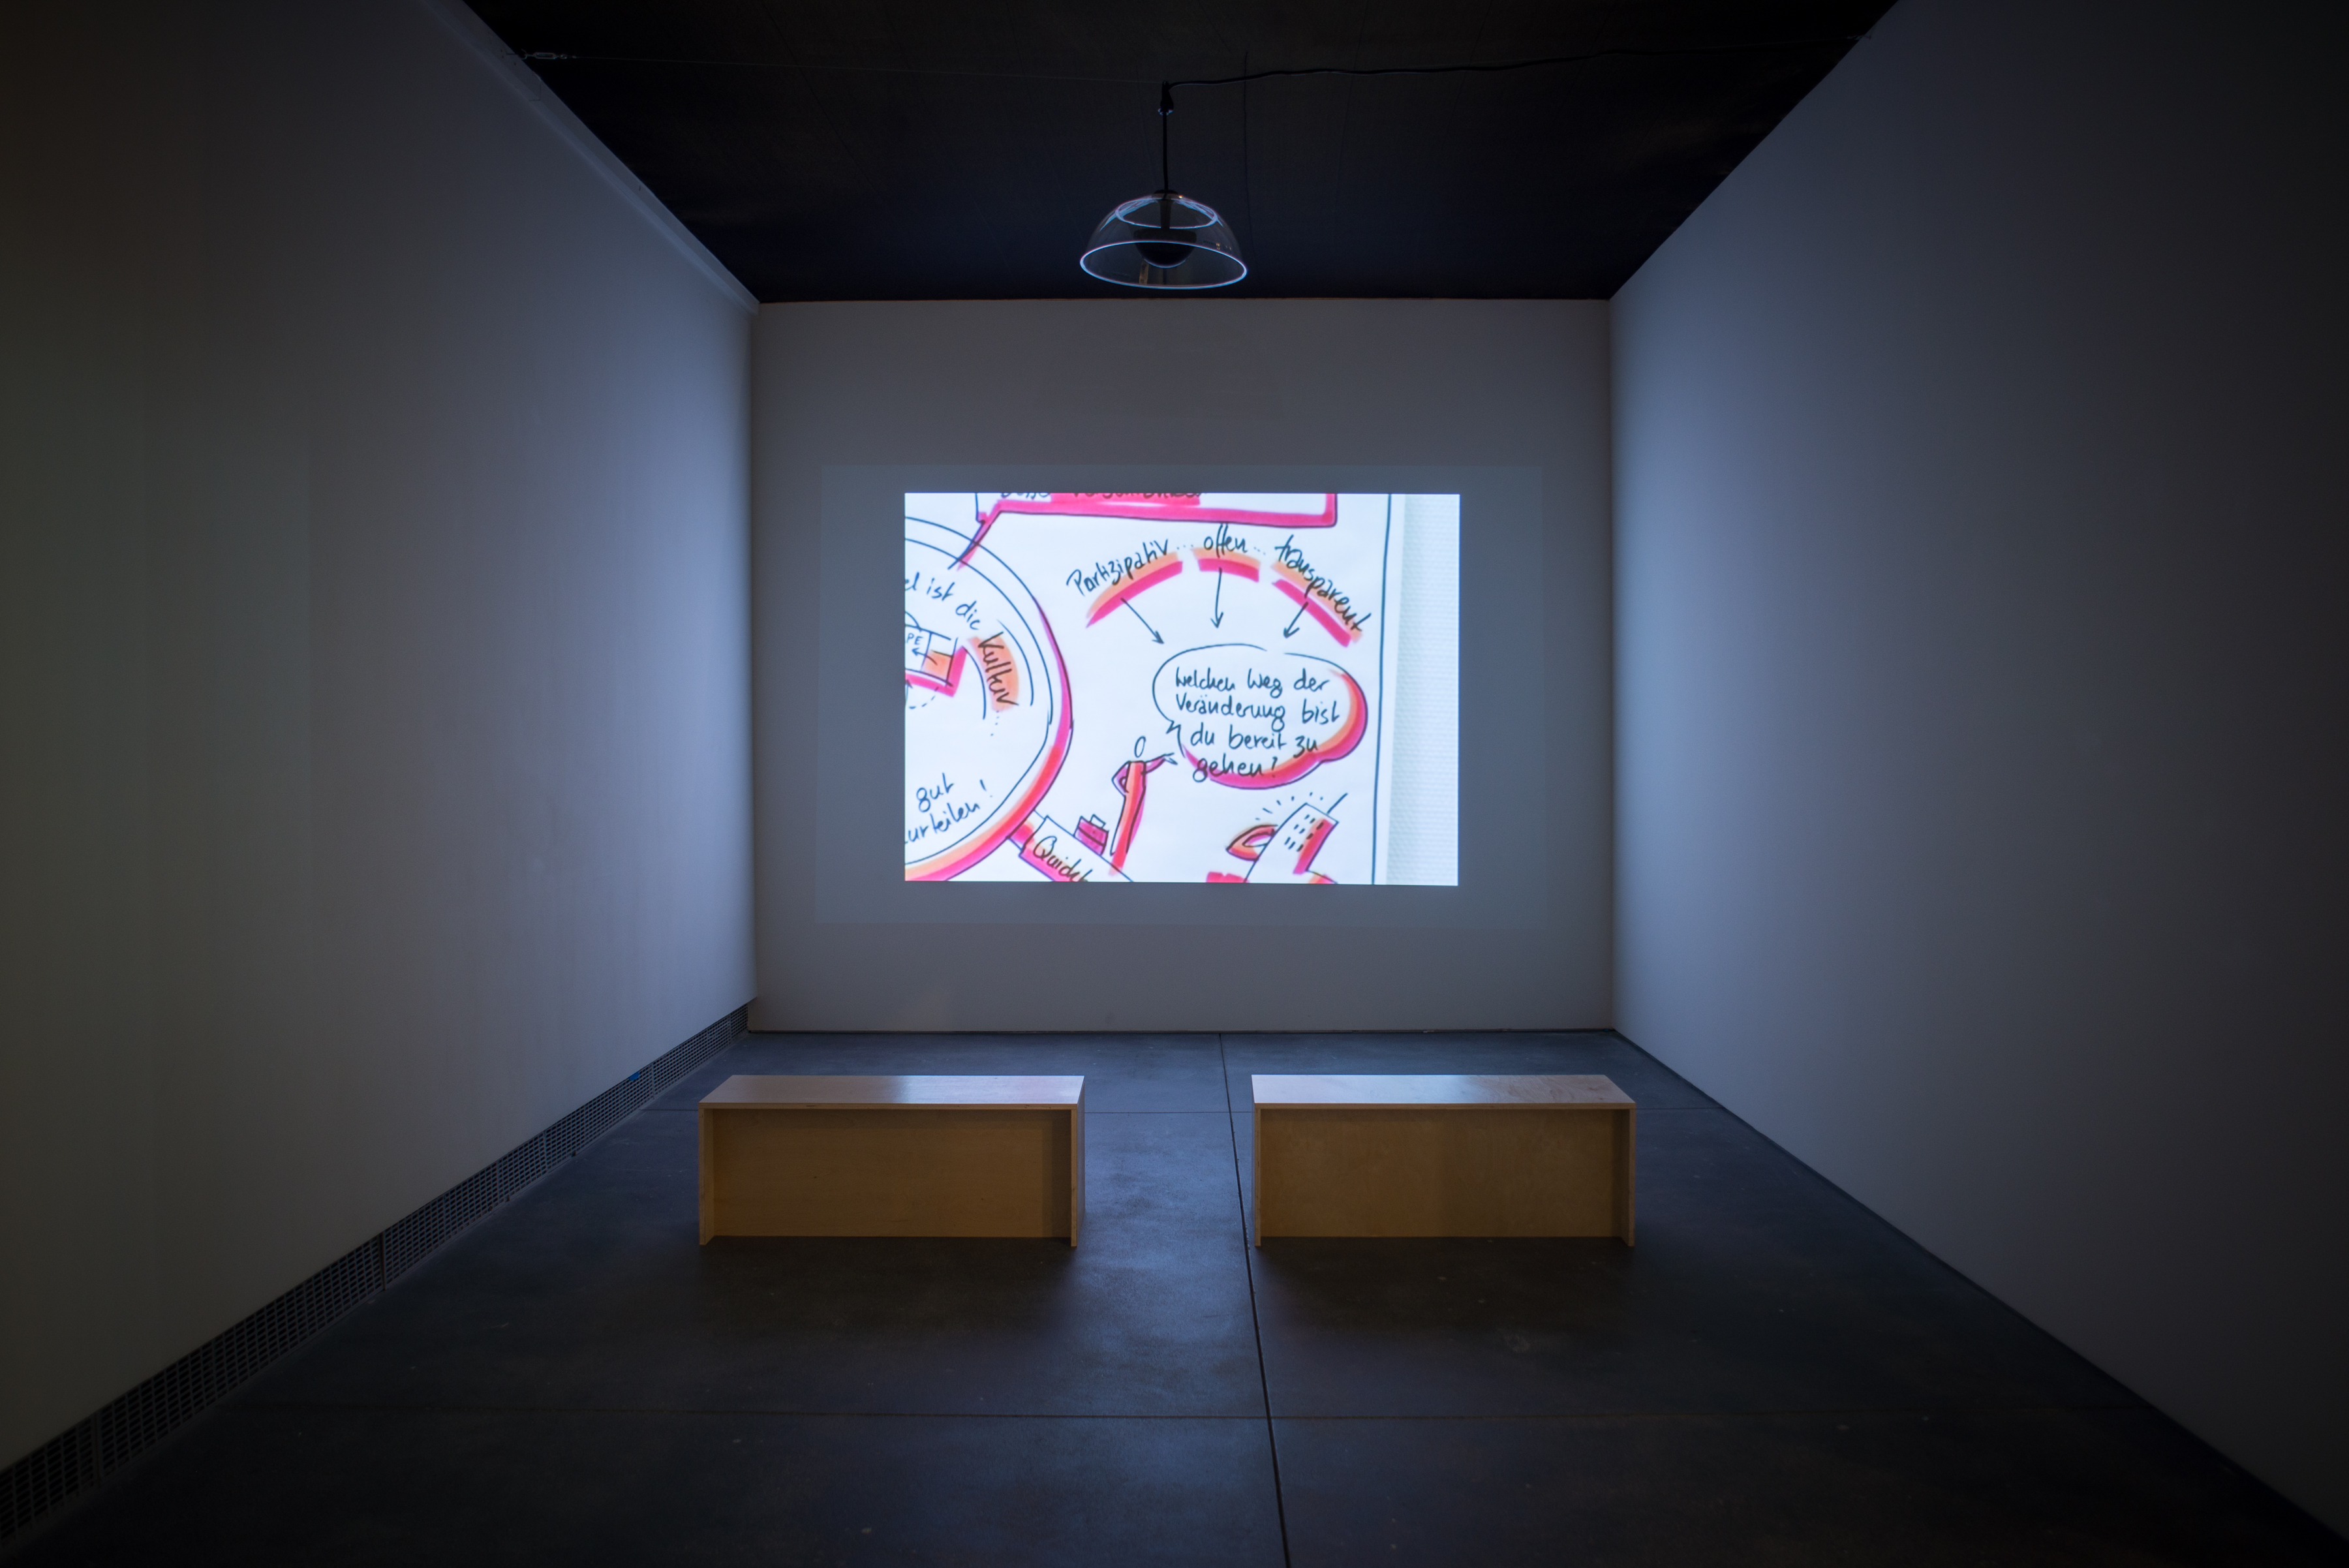 Office Space, installation view of Harun Farocki, A New Product, 2012
Courtesy Video Data Bank, Chicago
Photo: Charlie Villyard
